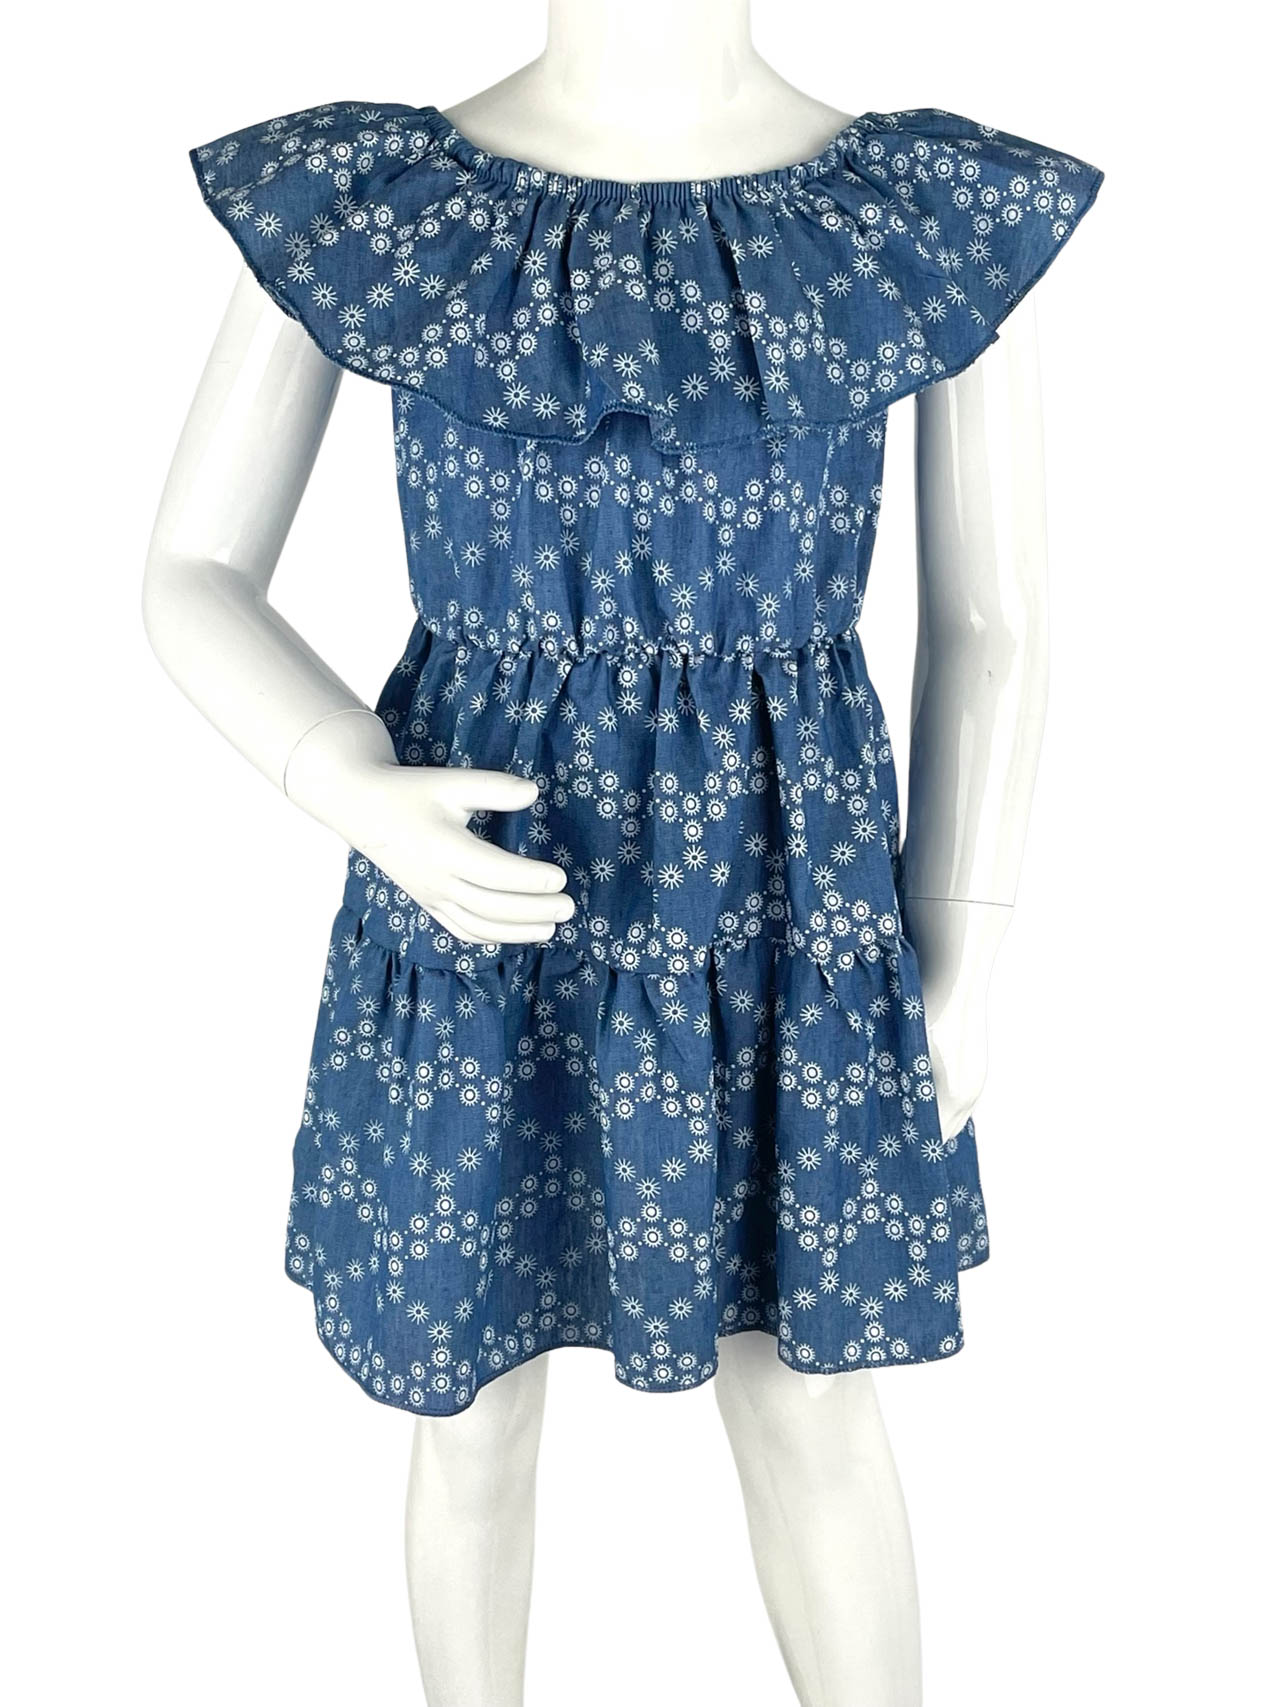 Girl's jeans dress with ruffles code 9760